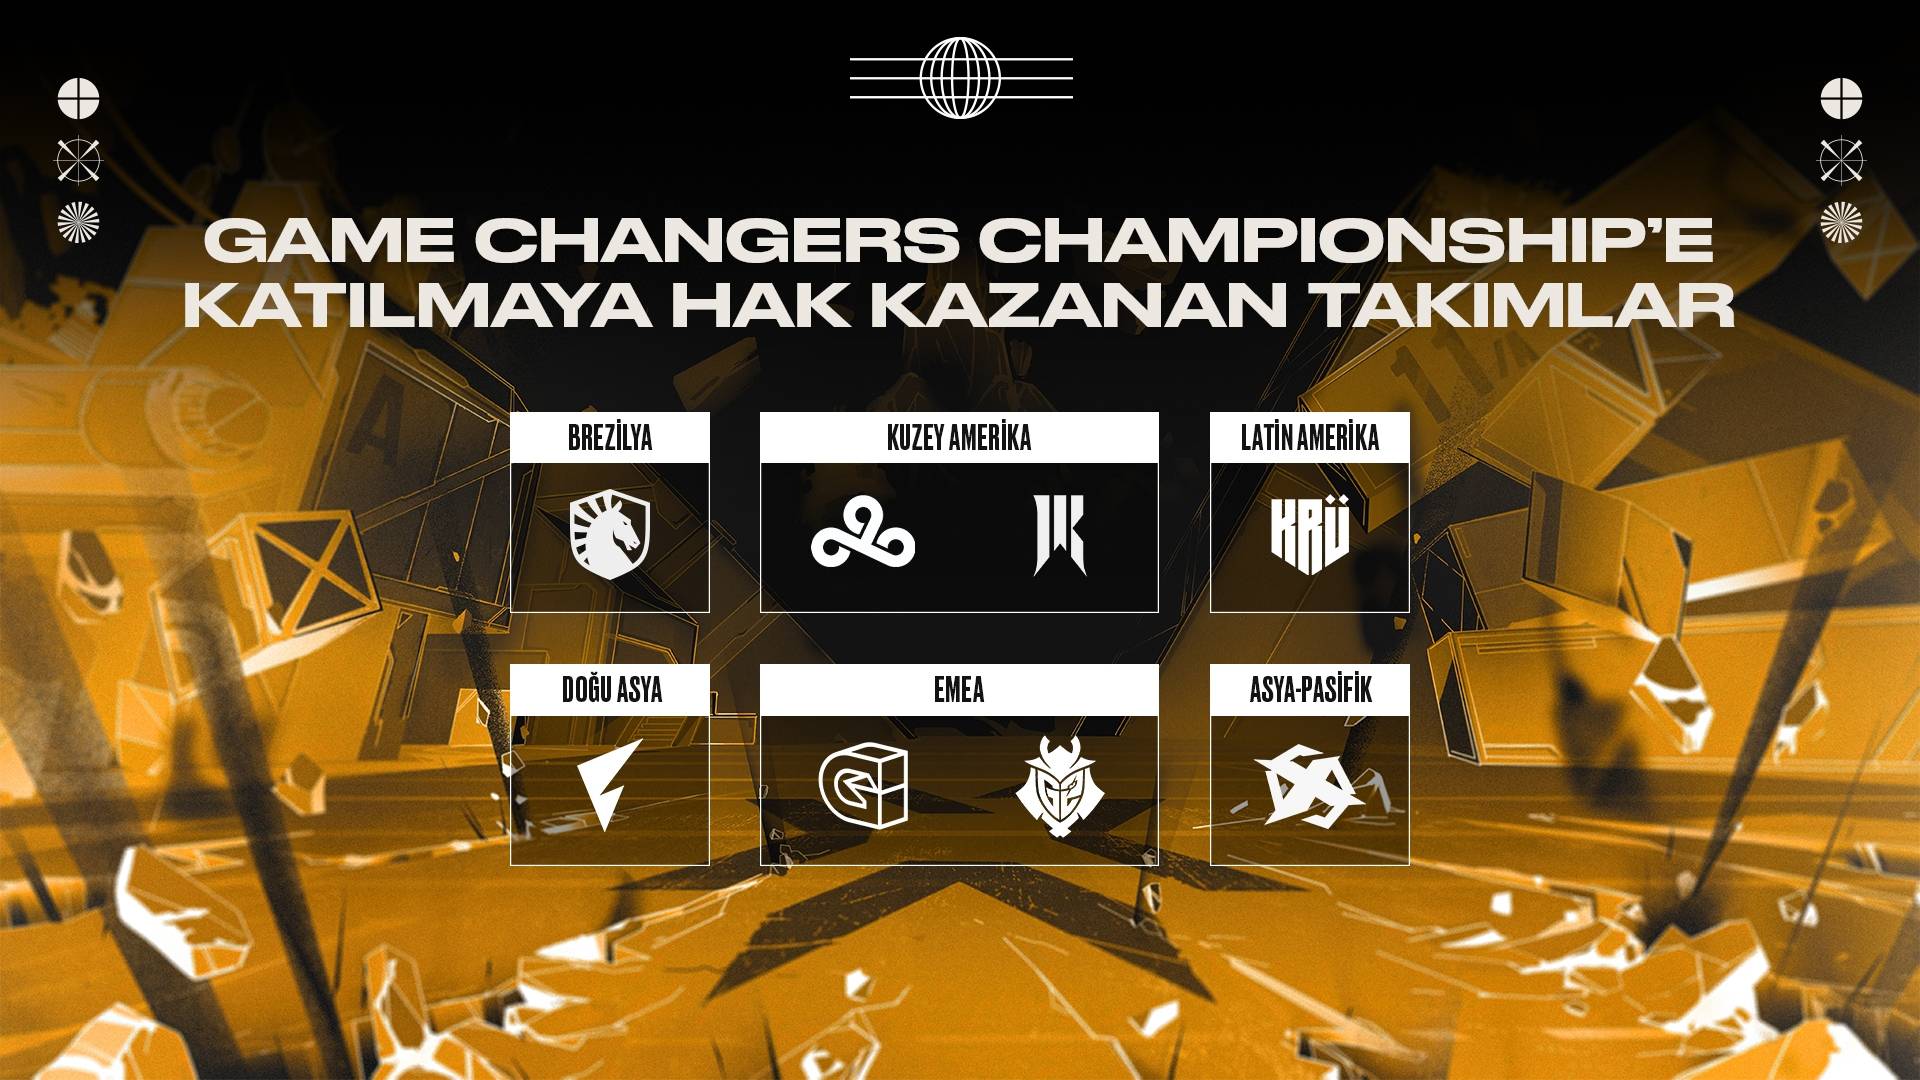 game changers participating teams